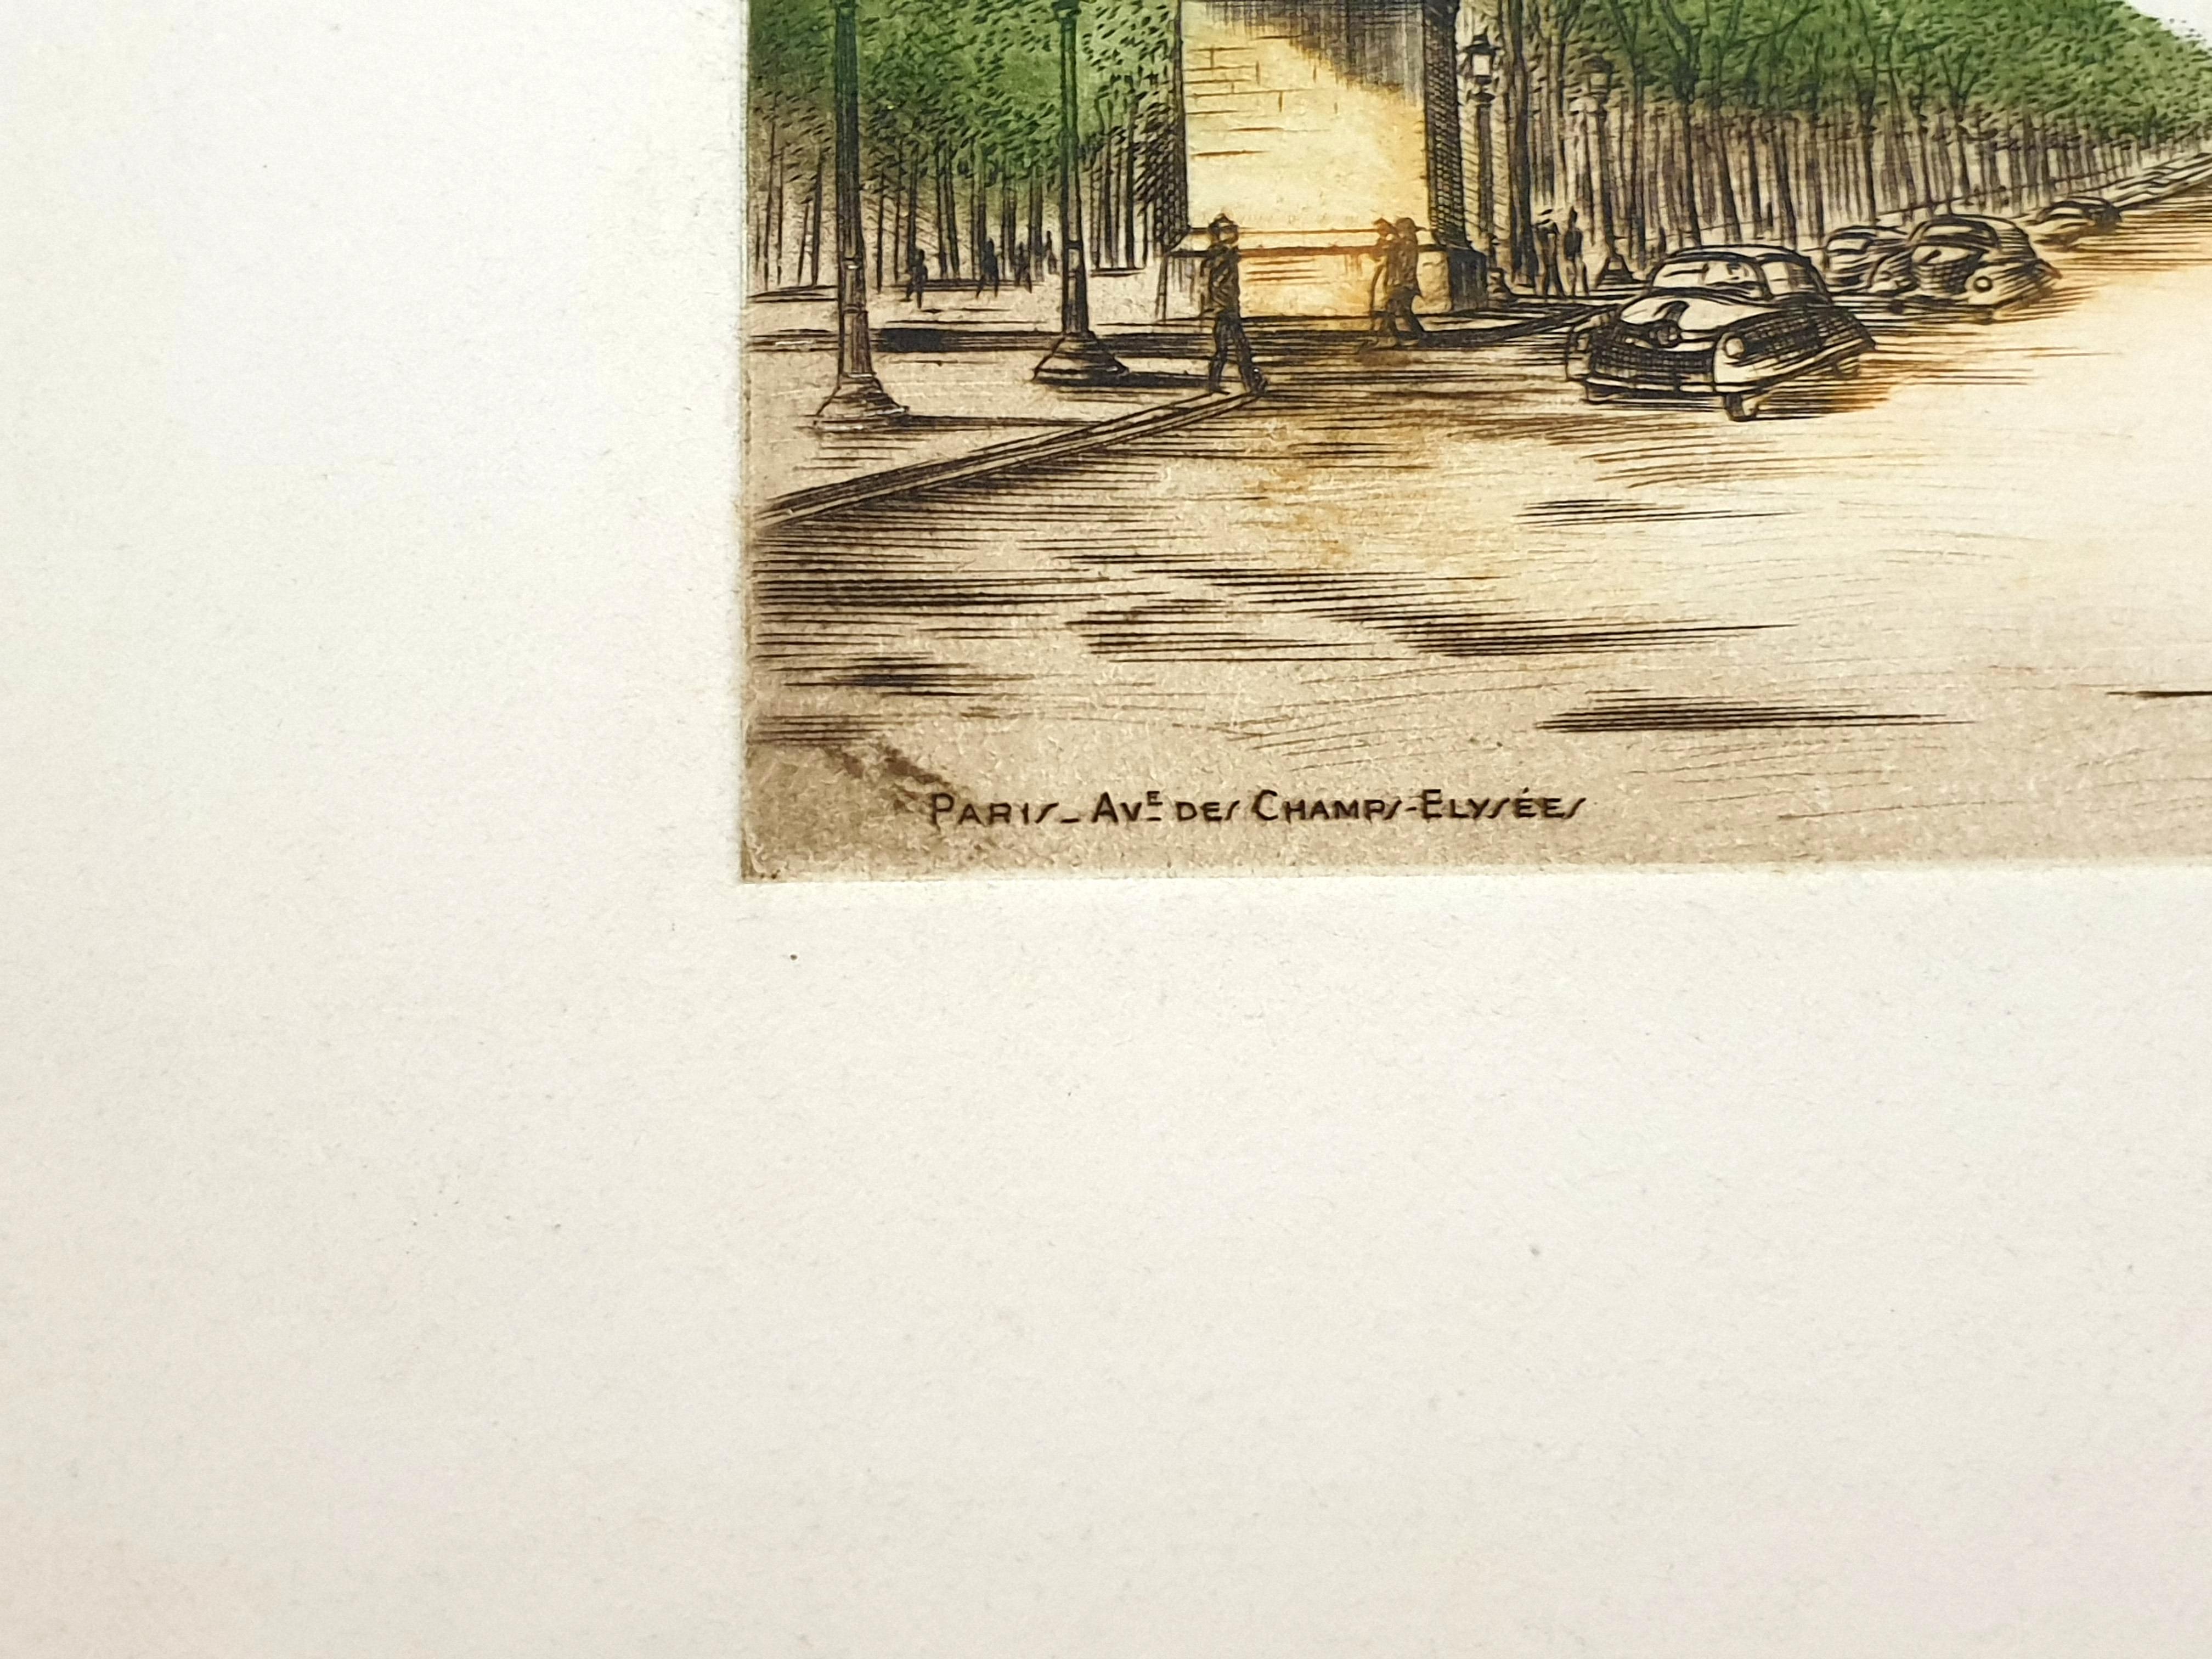 Dufza - Paris - Champs Elysées - Original Handsigned Etching
Circa 1940
Handsigned in pencil
Dimensions: 20 x 25 cm
Unumbered as issued 